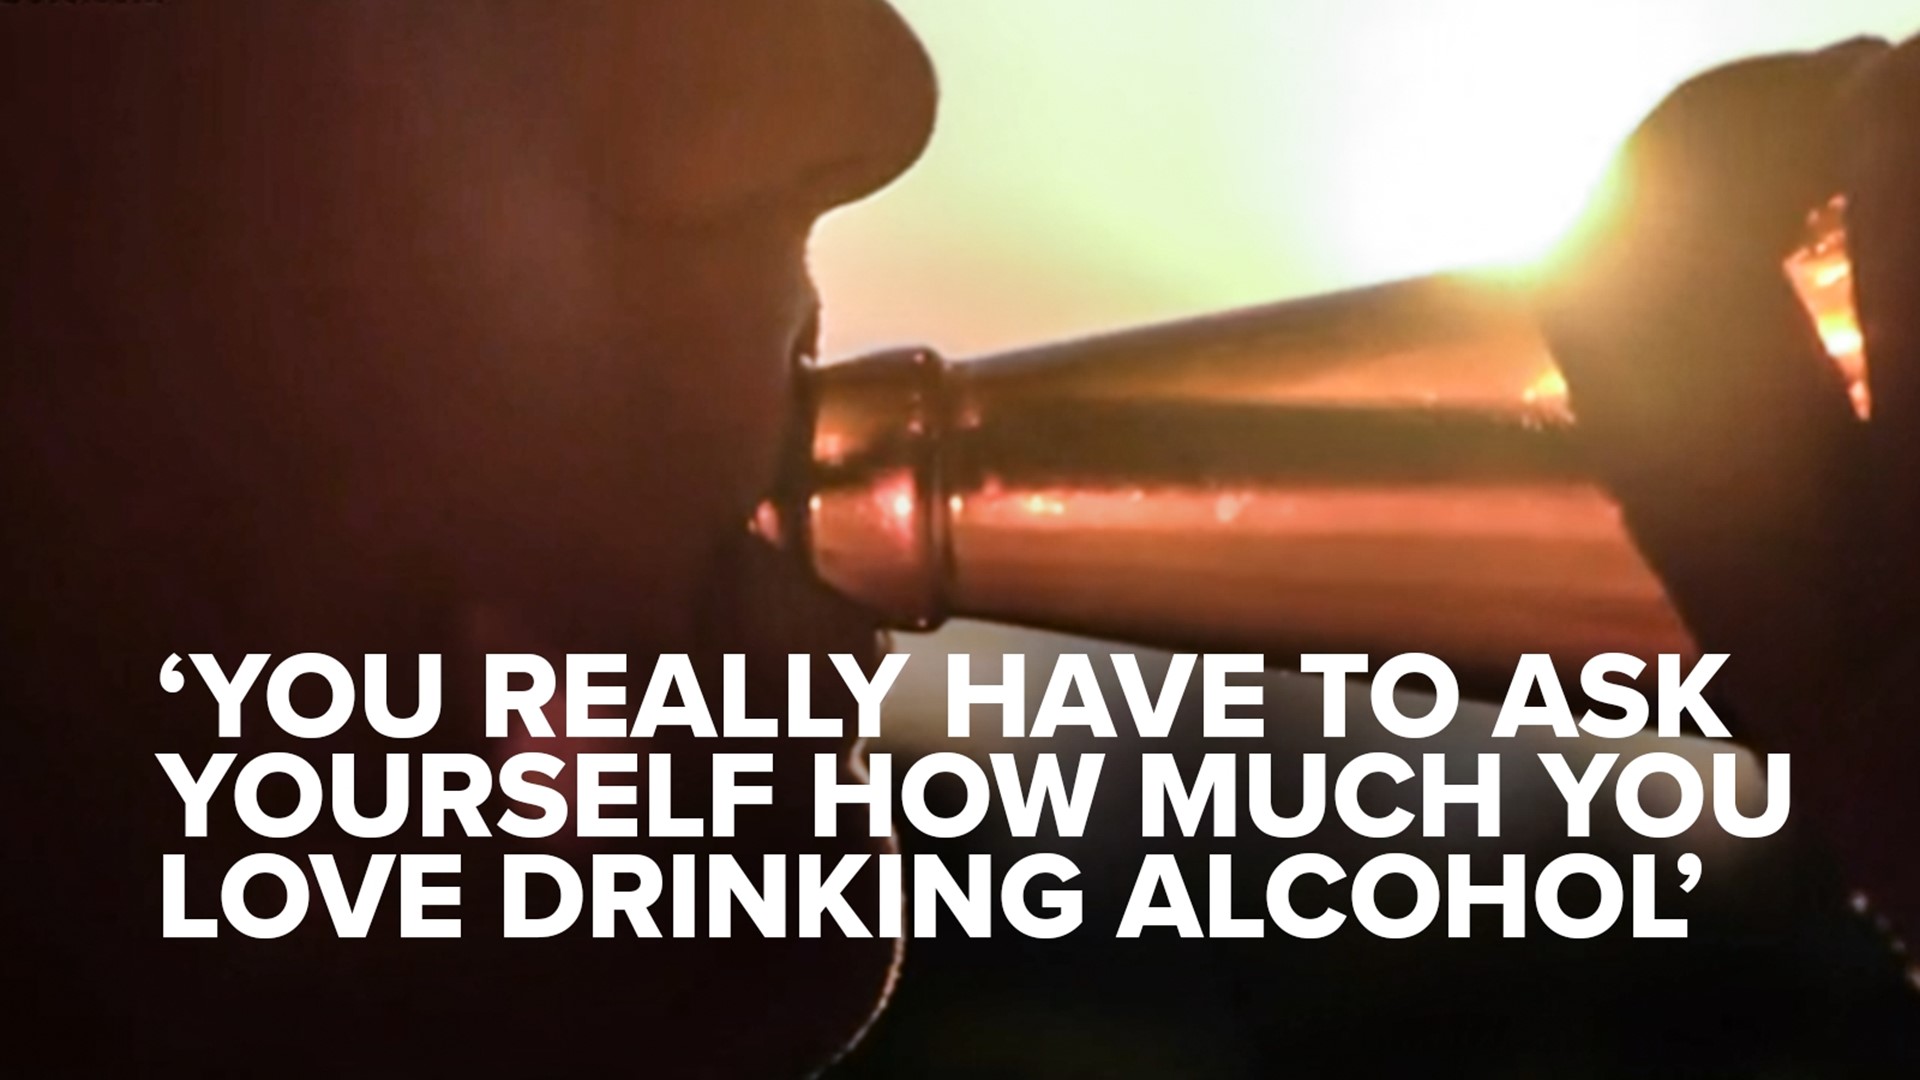 As many people are still unaware alcohol is a leading cause of cancer, a leading cancer research institute is trying to spread awareness of this .